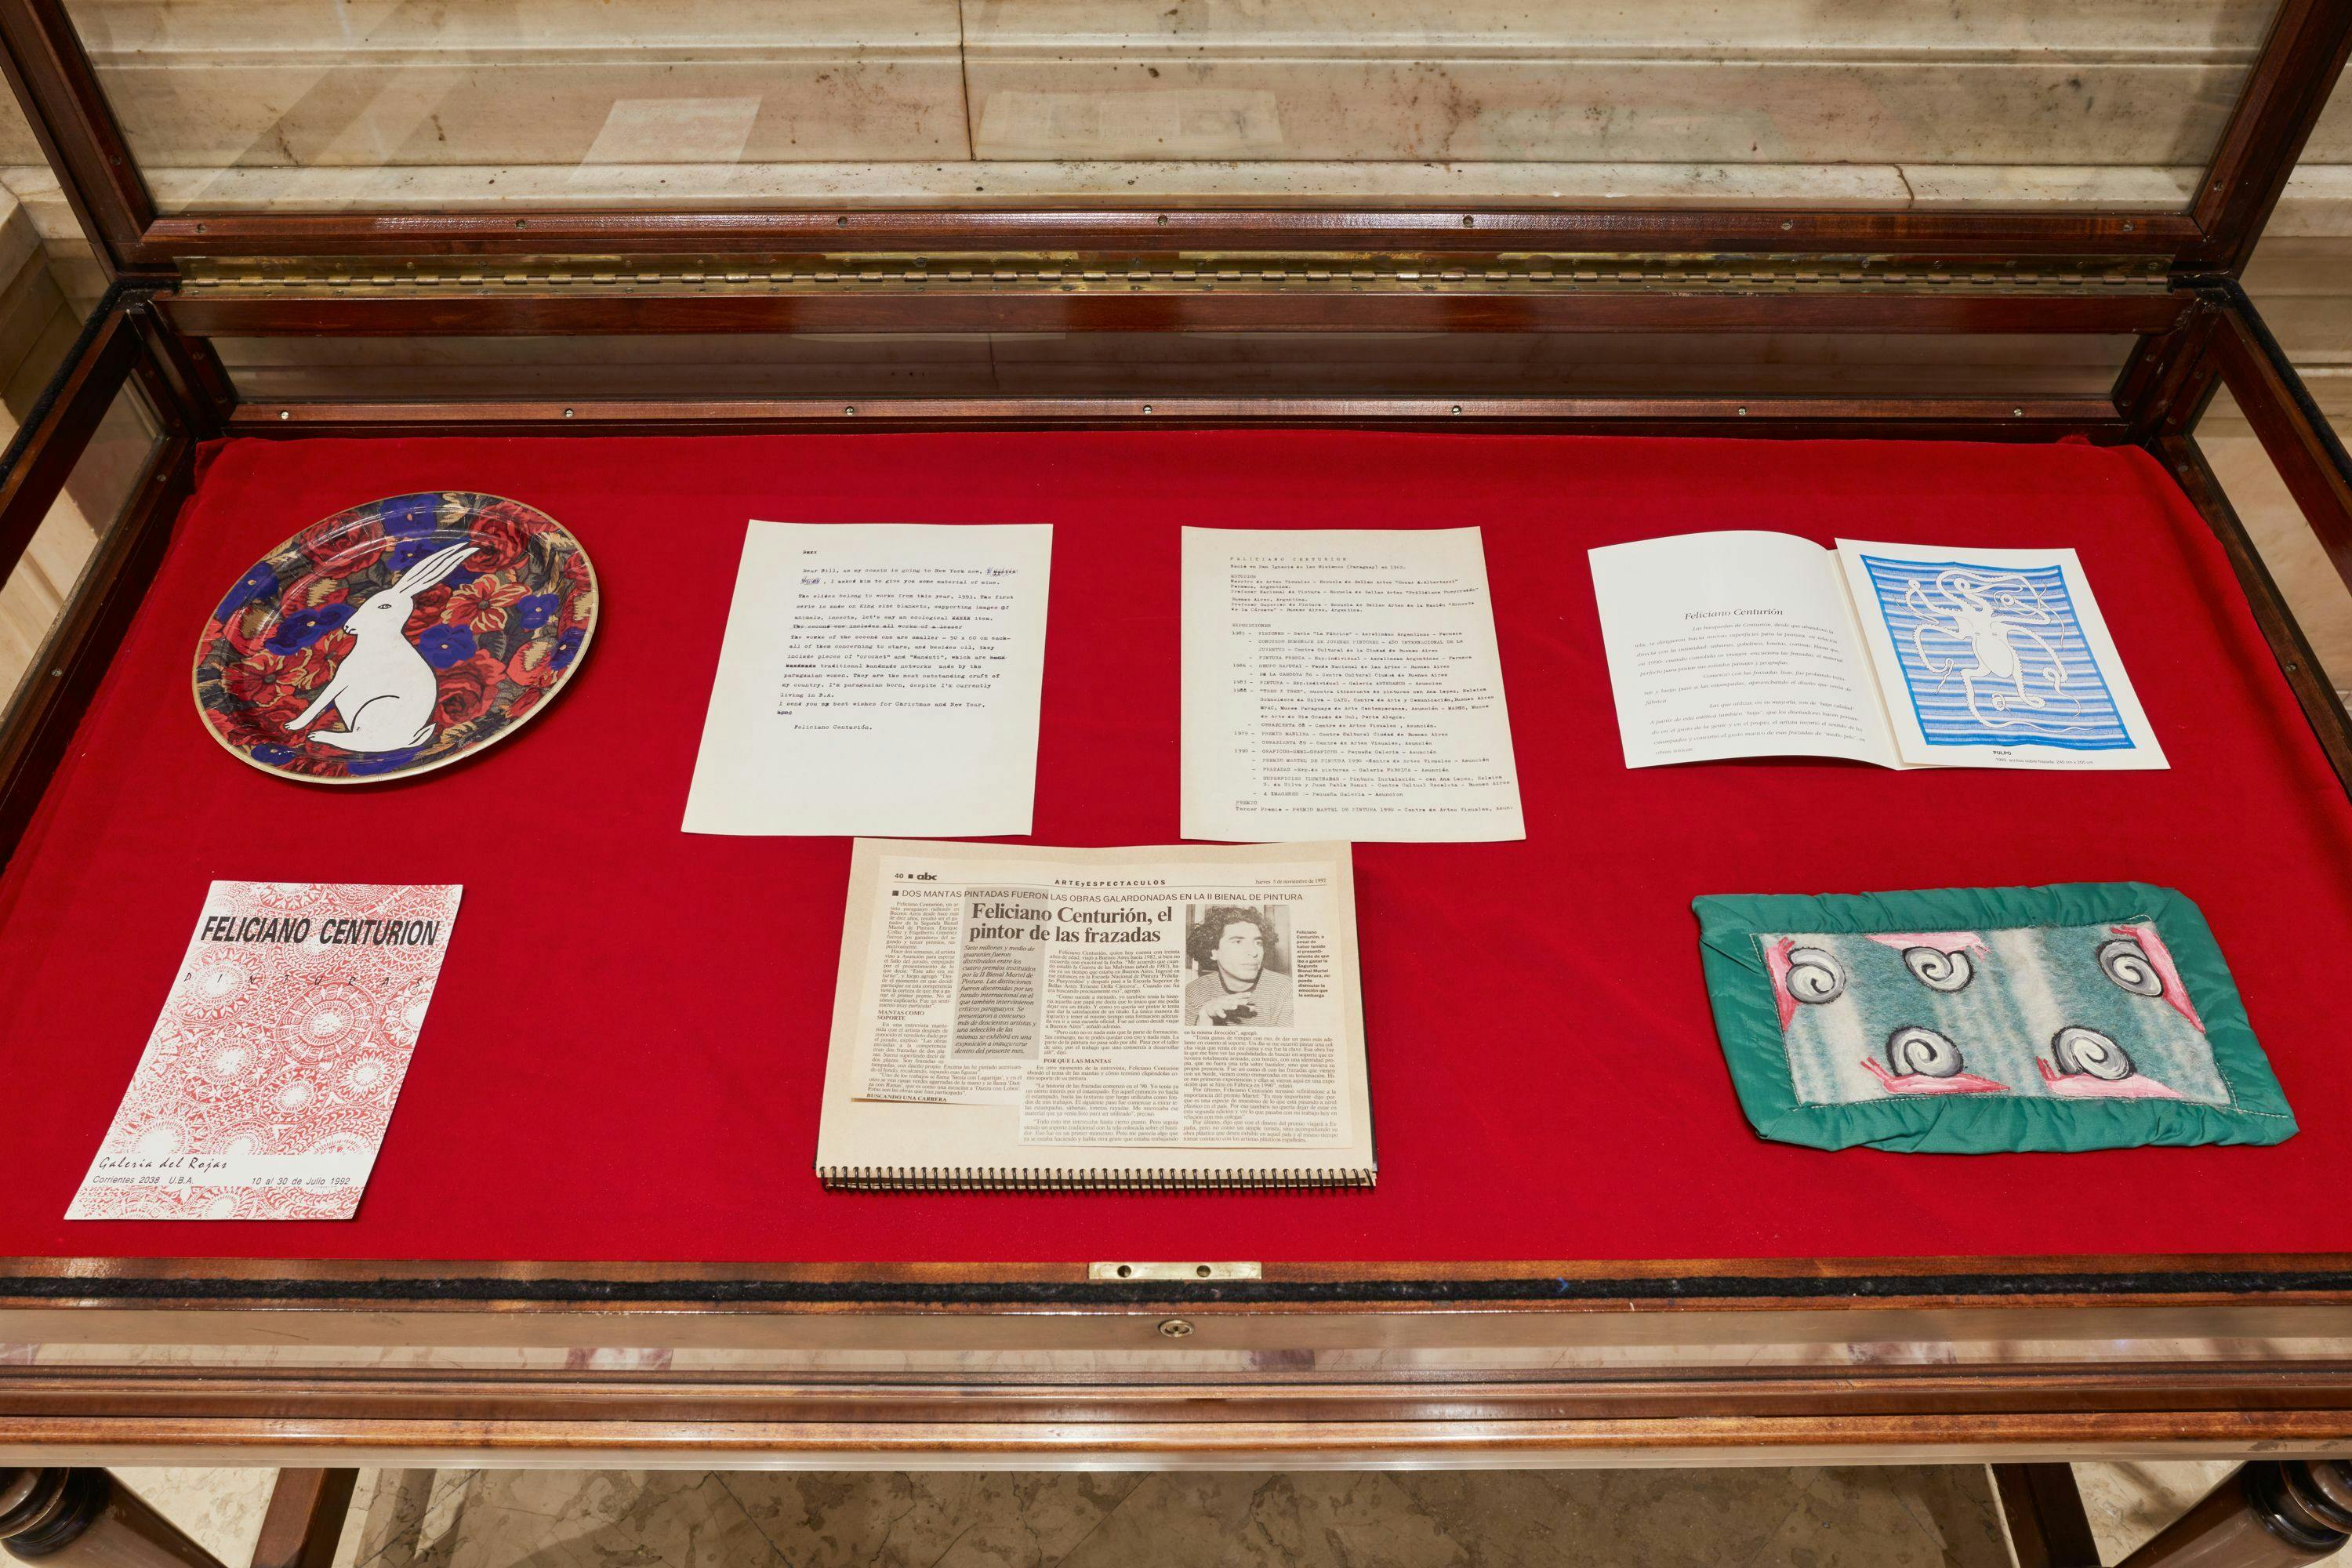 Installation view of archival items in vitrine